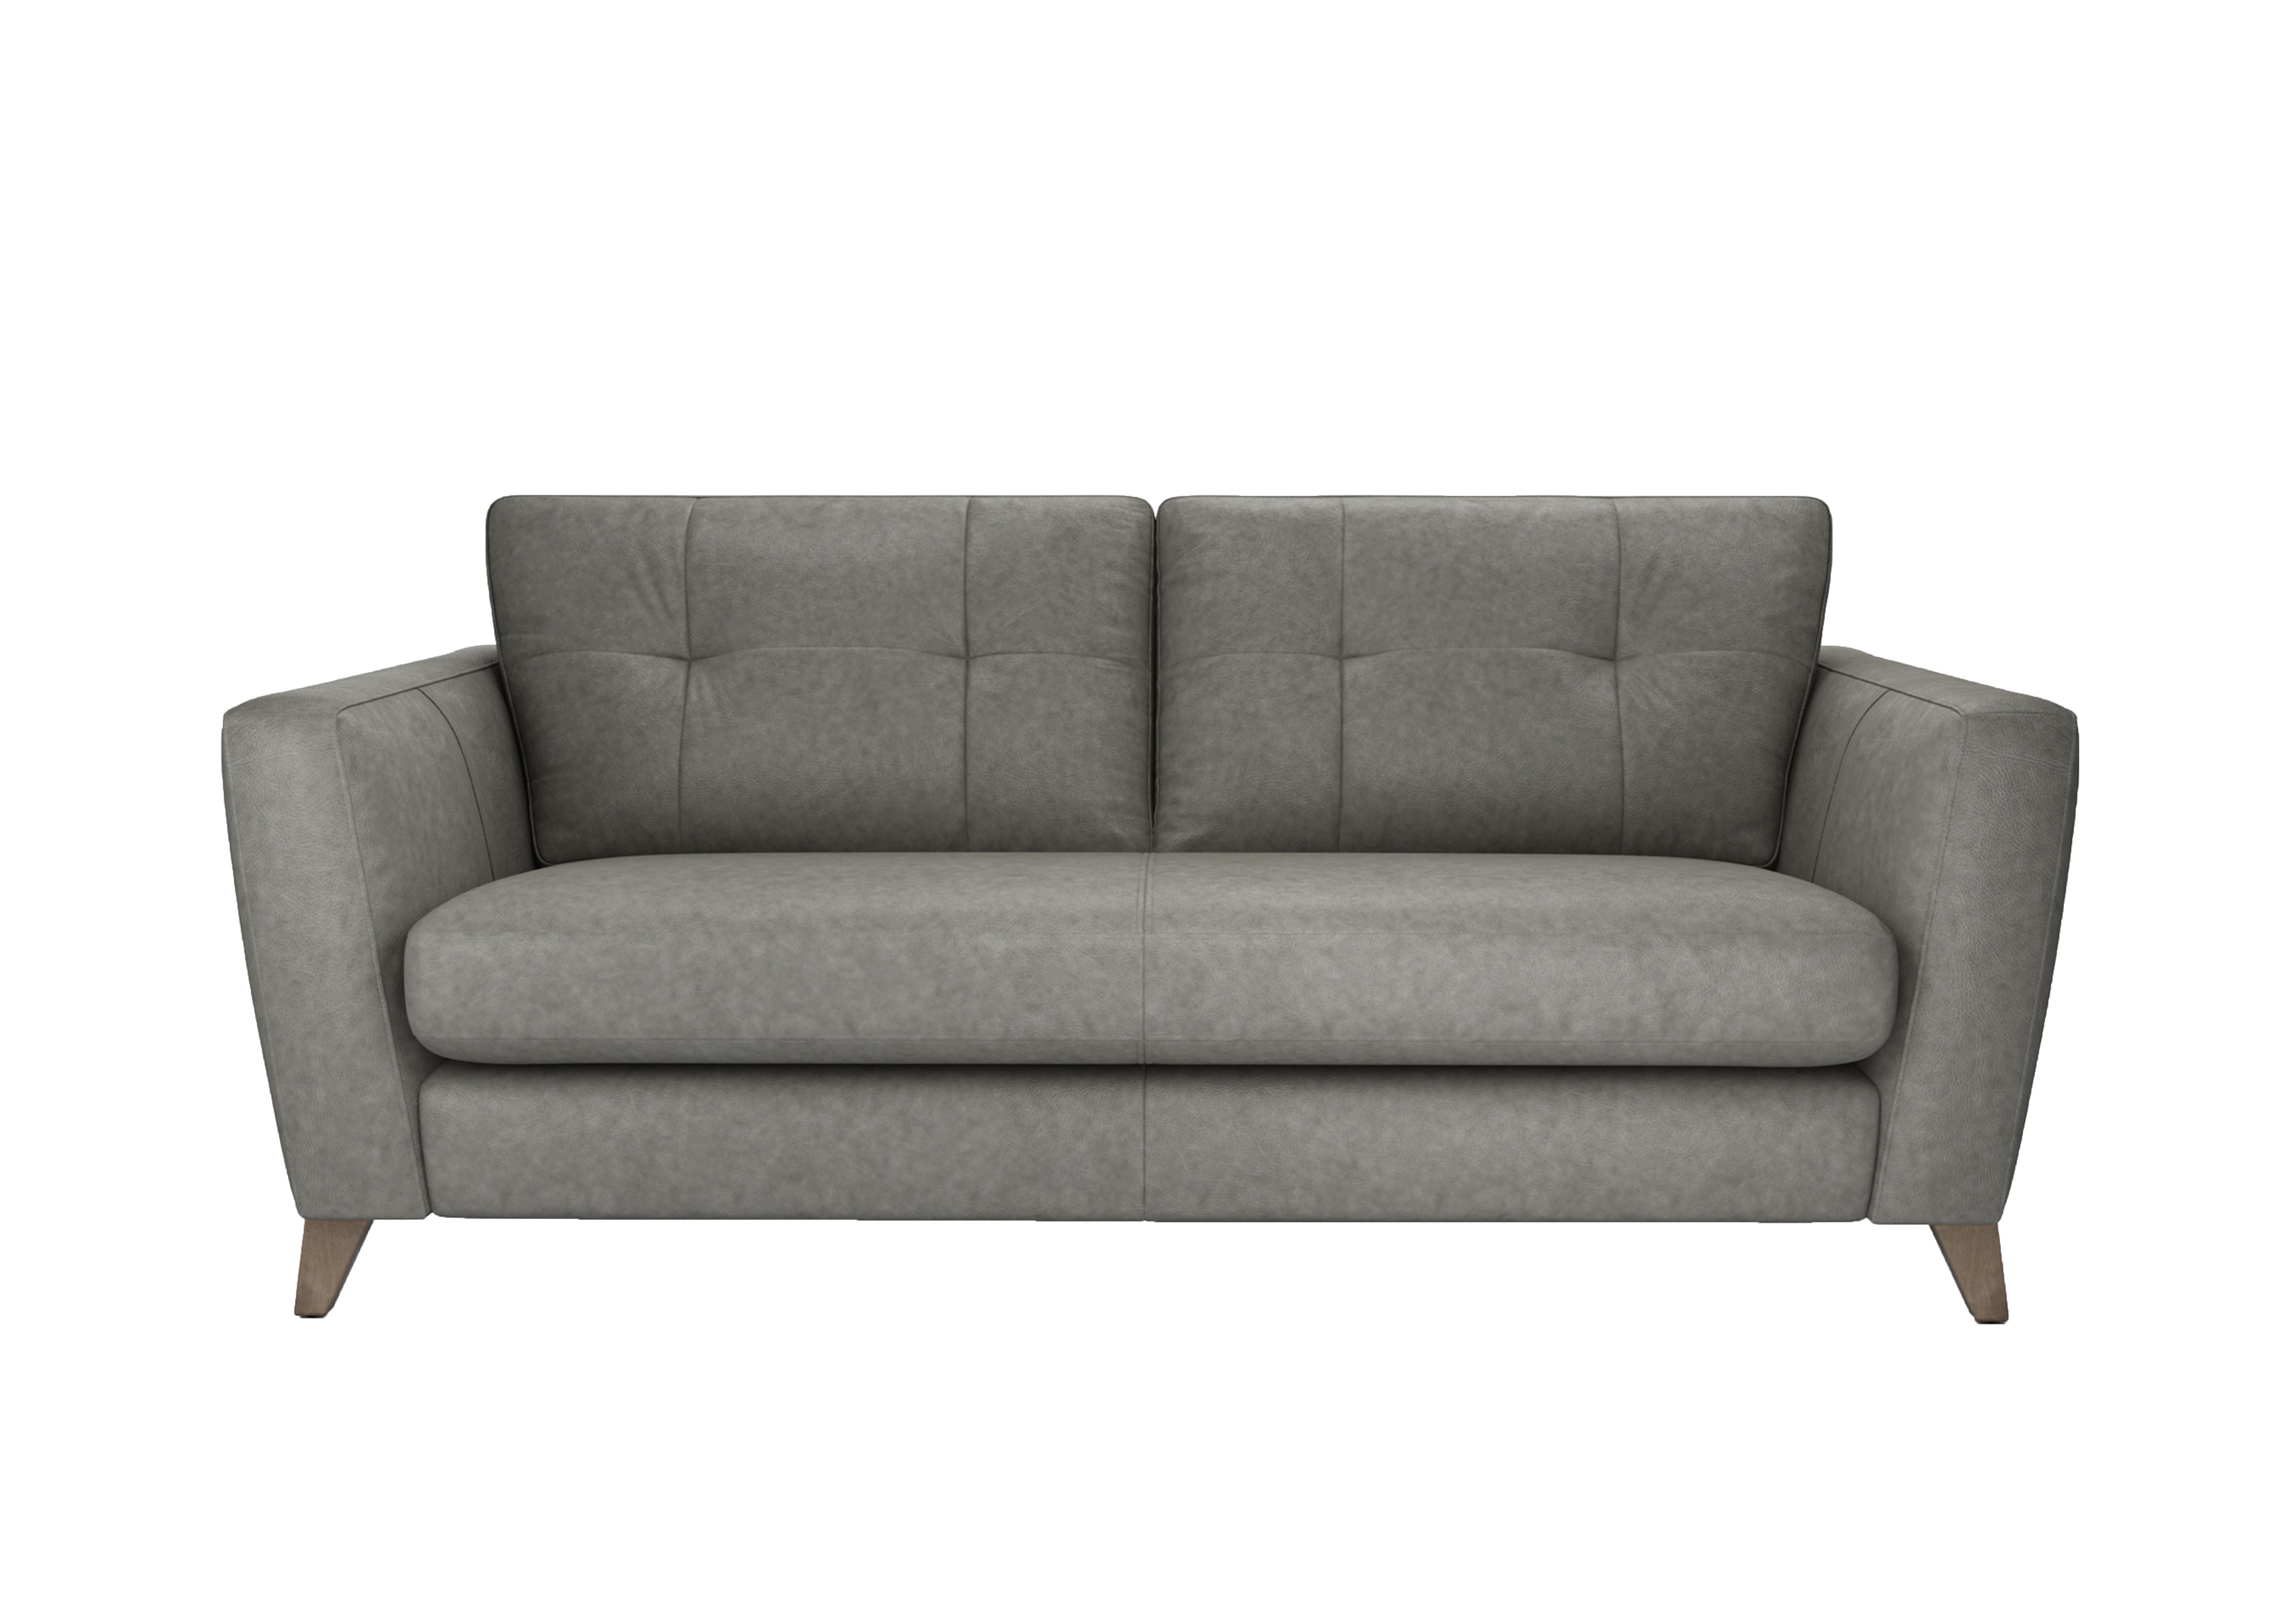 Hermione 3 Seater Leather Sofa in Amo191 Amonite Wo Ft on Furniture Village